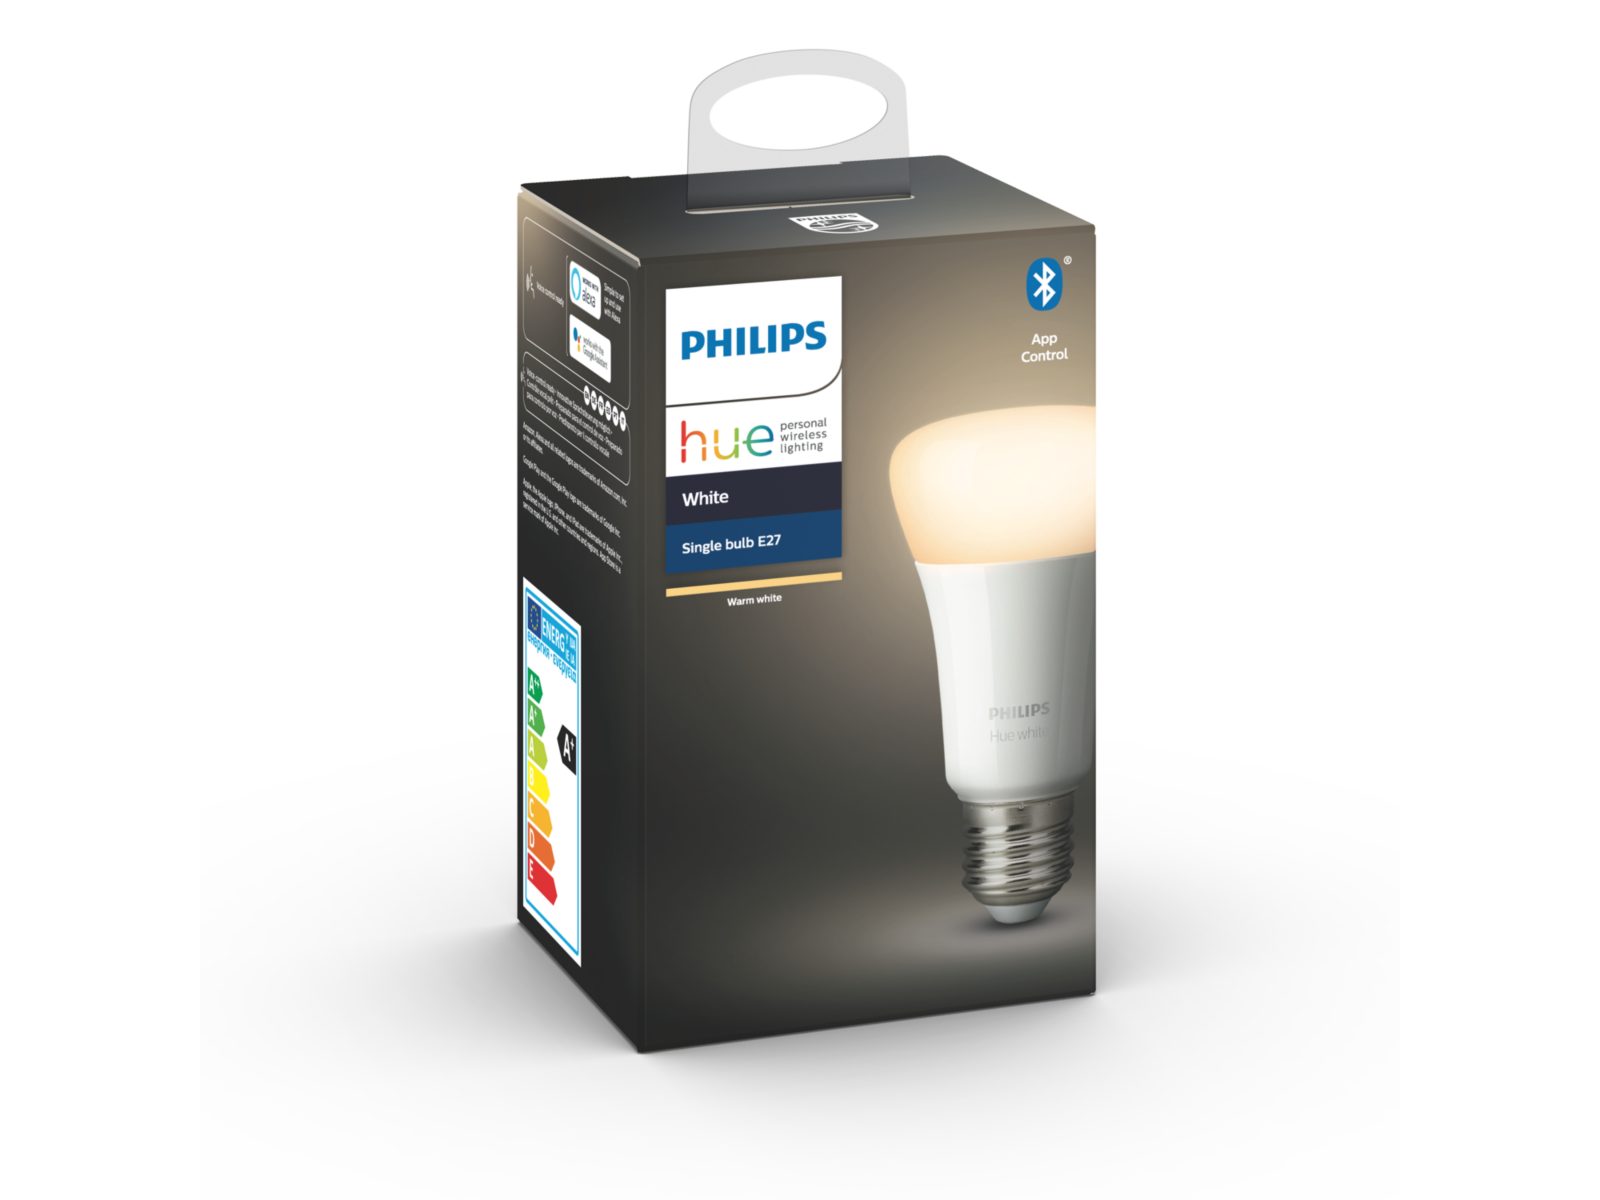 a philips hue smart light bulb white light, e27 fitting in its packaging